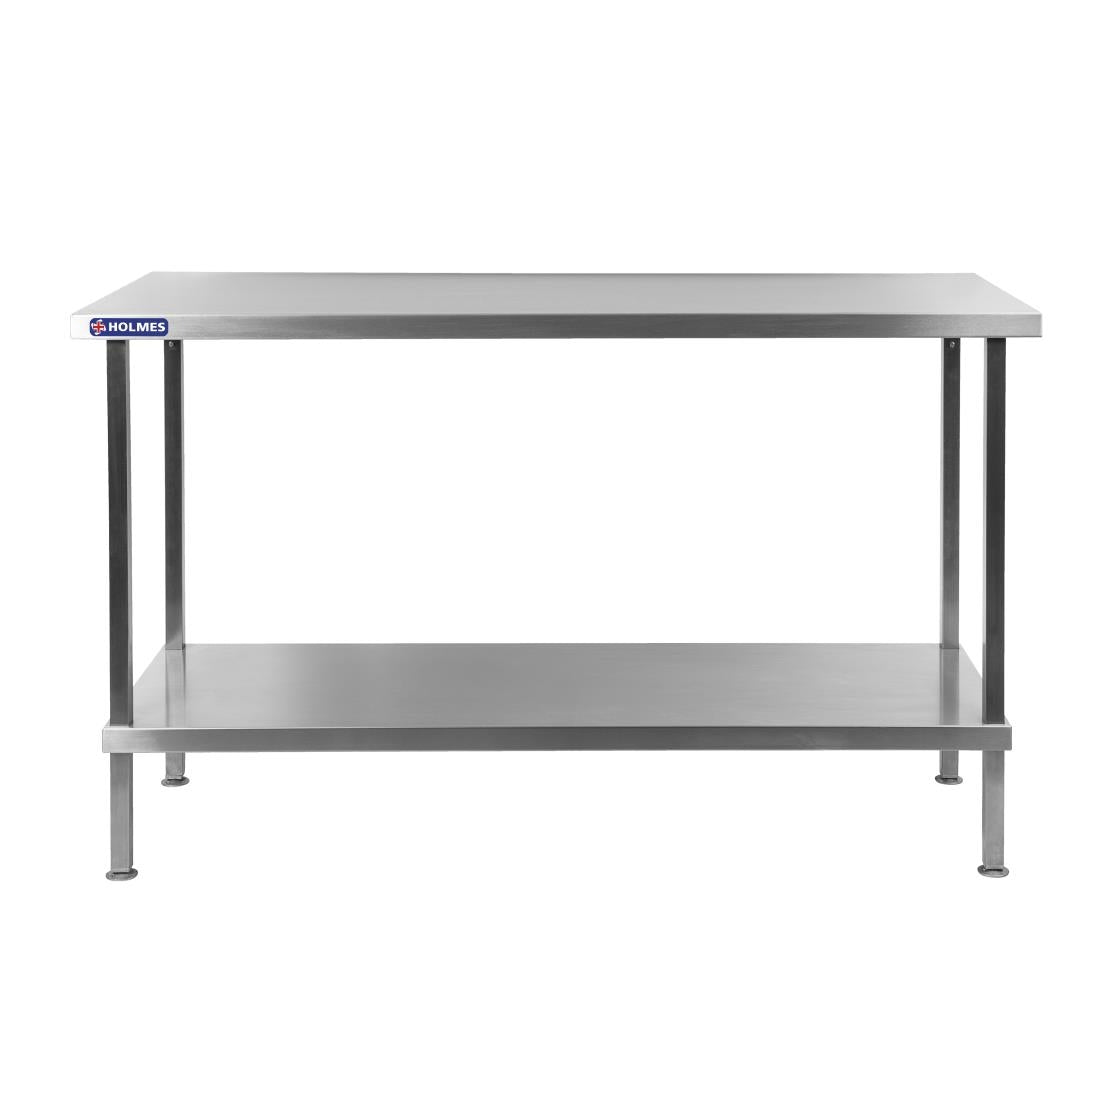 DR041 Holmes Stainless Steel Centre Table 600mm JD Catering Equipment Solutions Ltd